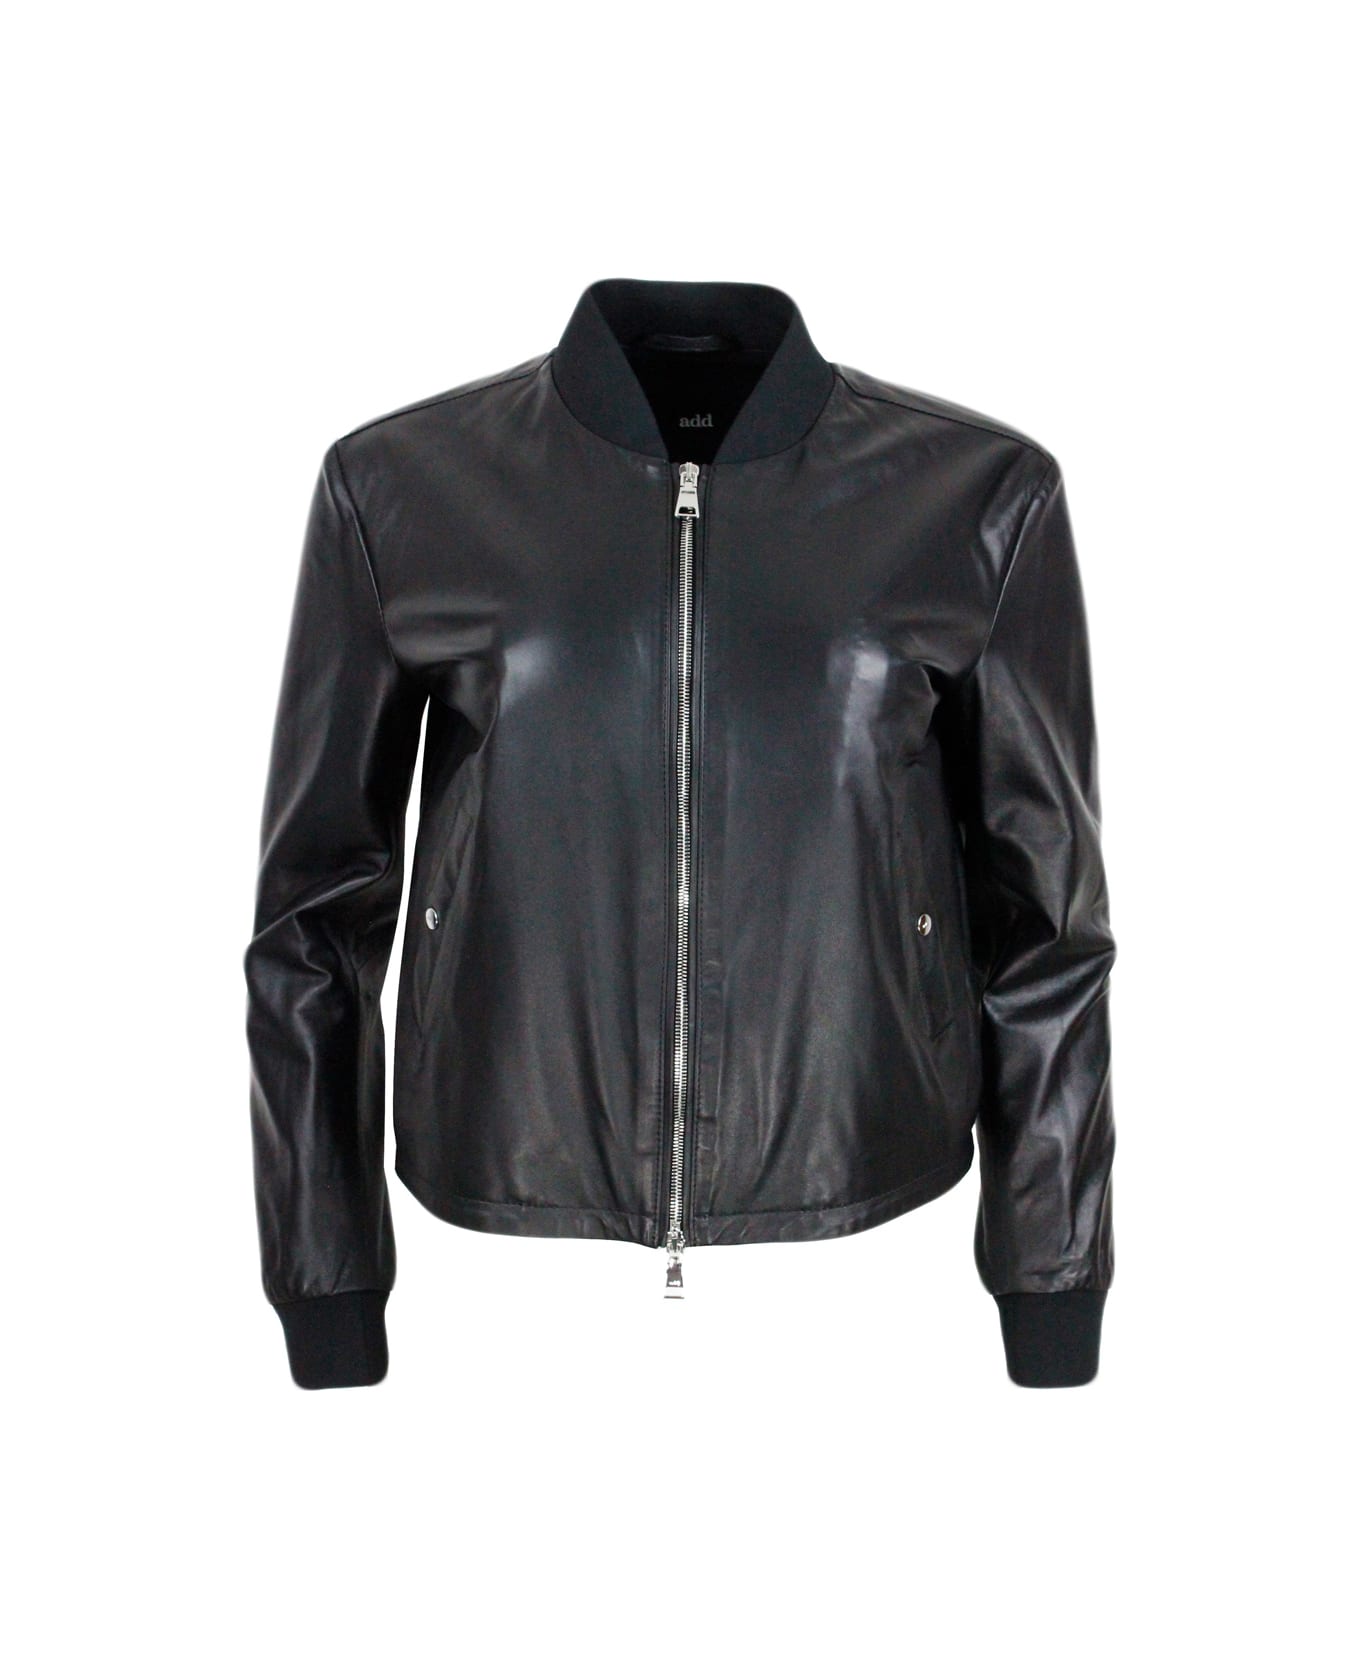 Add Jacket In Soft And Real Lambskin With College Collar And Zip Closure. Stretch Knit Collar And Cuffs - Black ジャケット